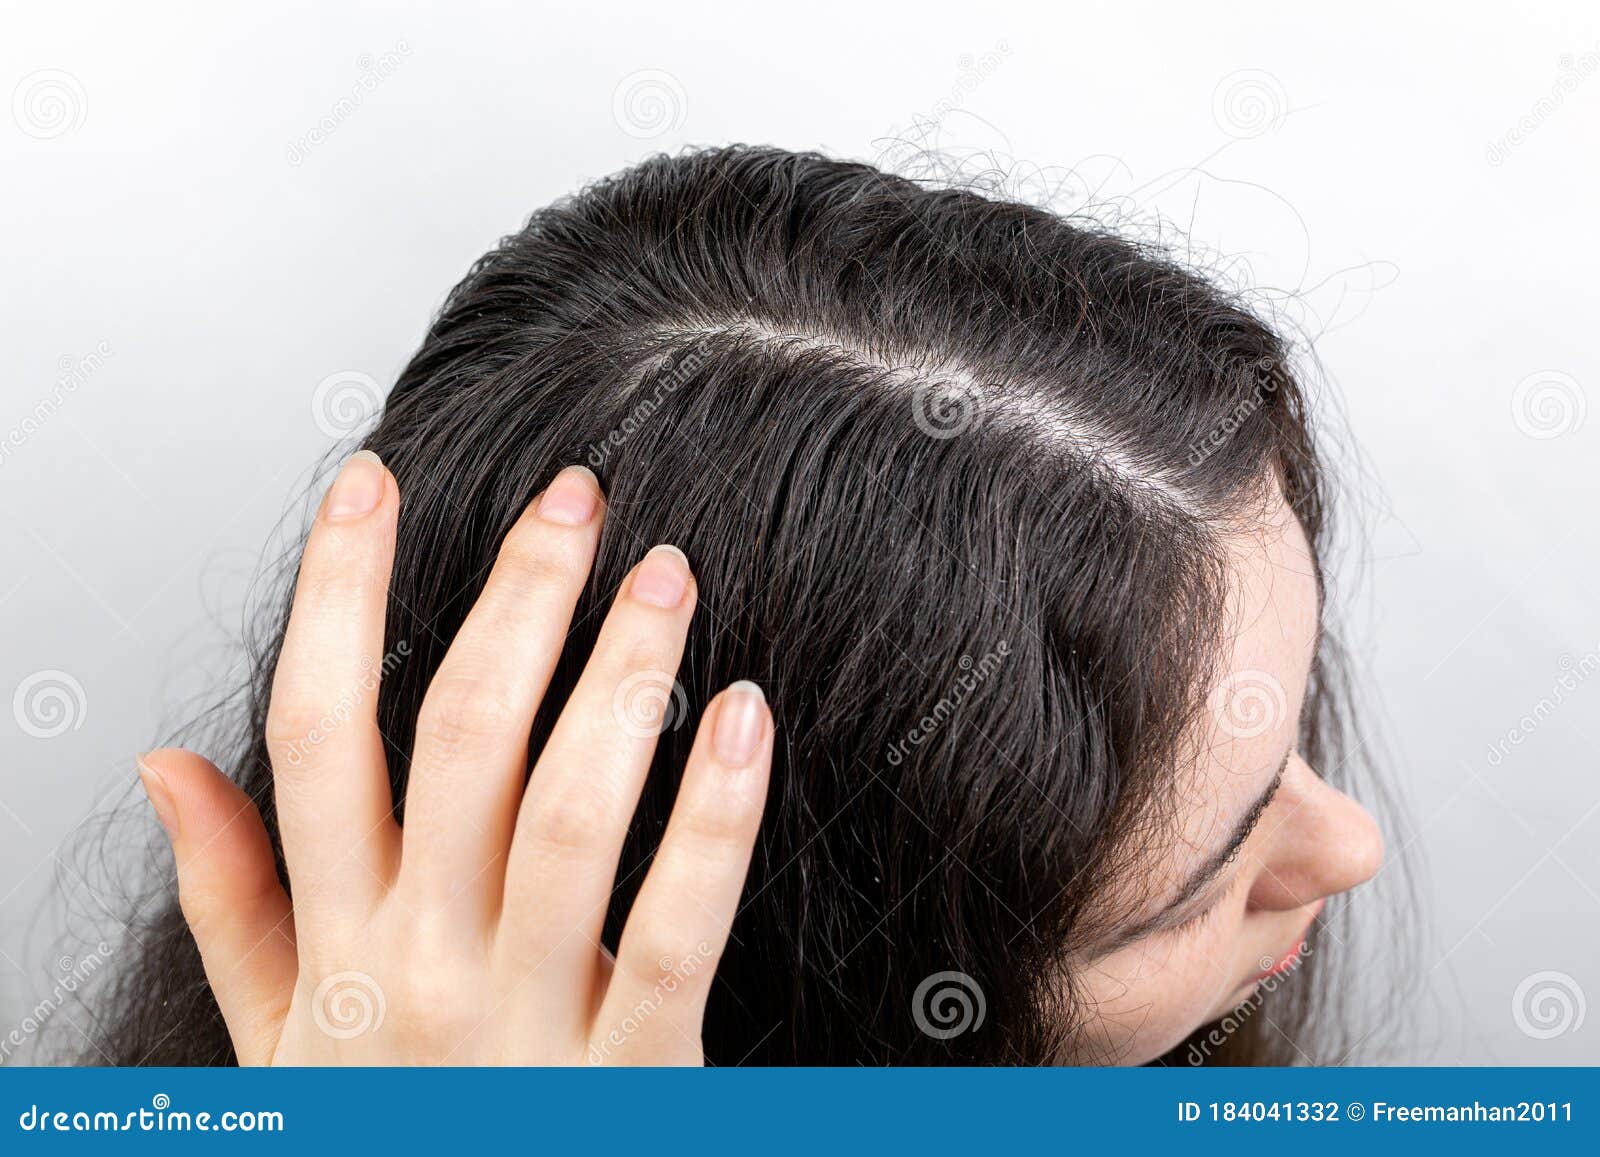 How to Remove Dandruff  Causes Signs and Treatments